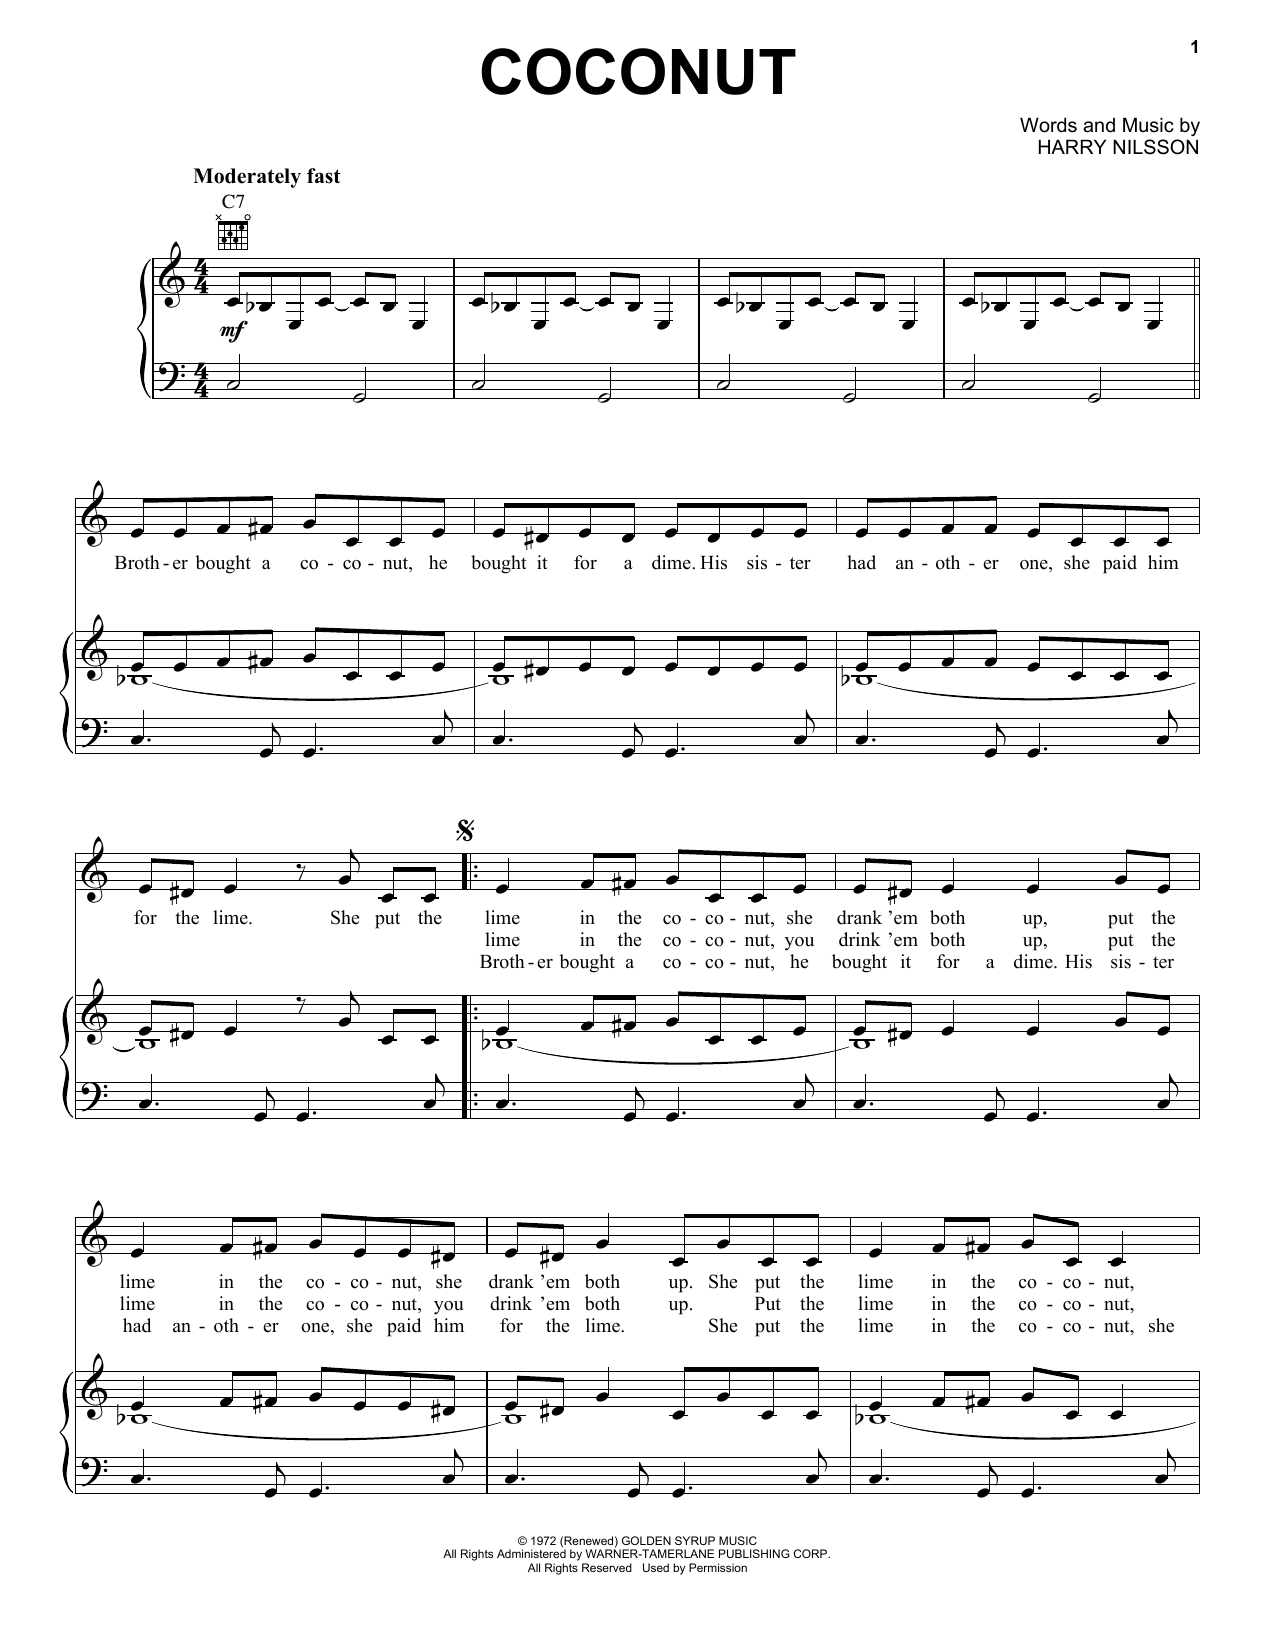 Harry Nilsson Coconut sheet music notes and chords. Download Printable PDF.